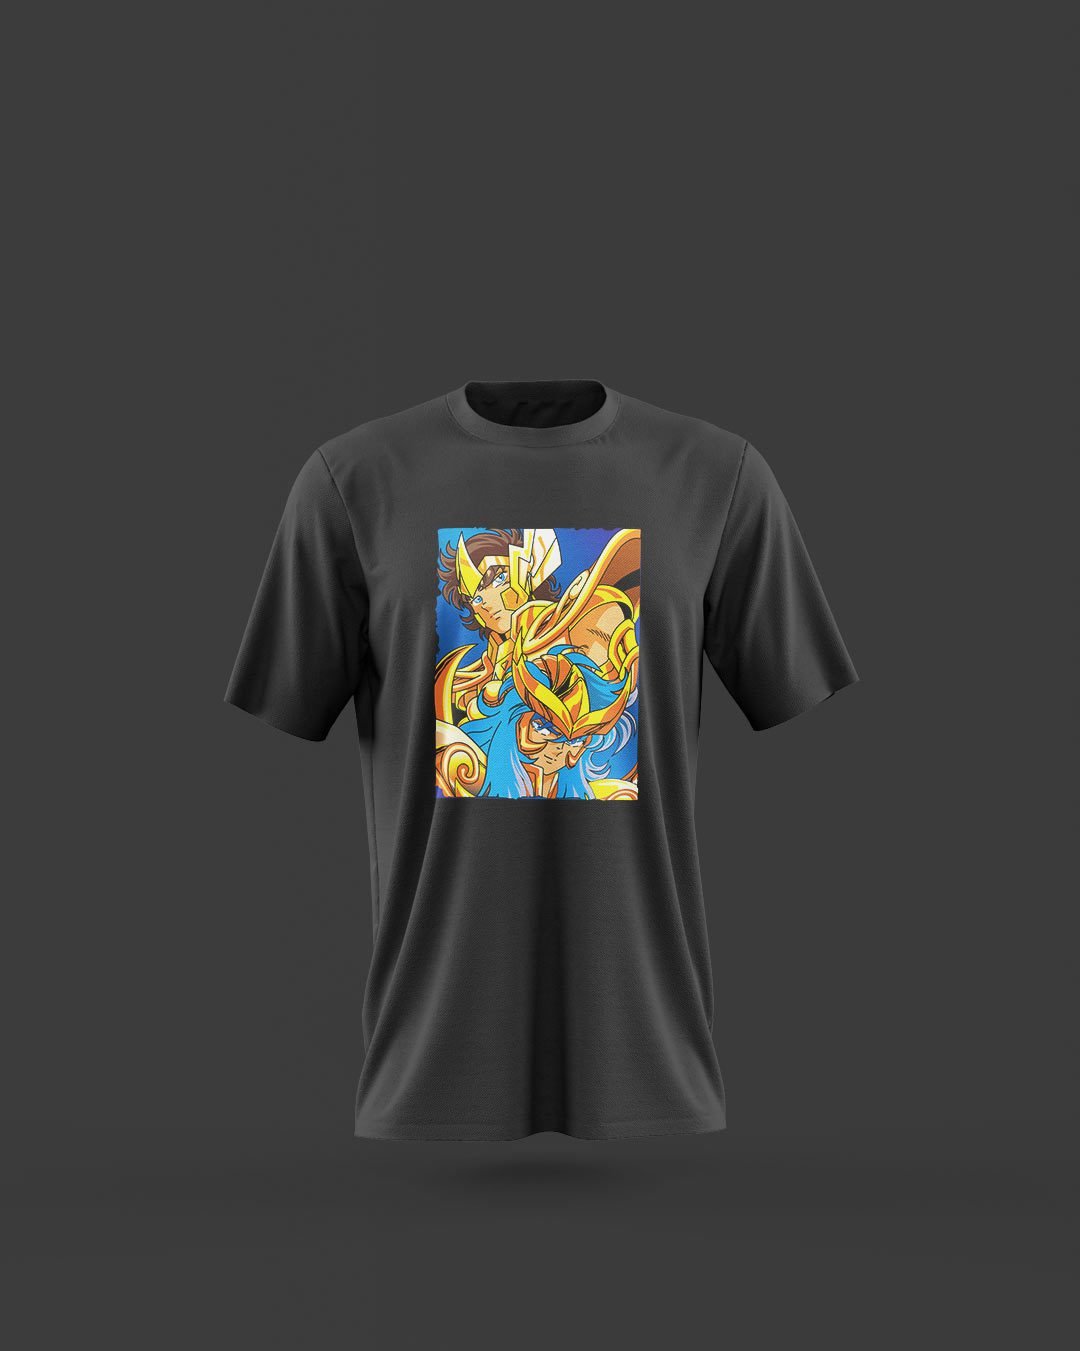 Anime Character Graphic Printed T-Shirt